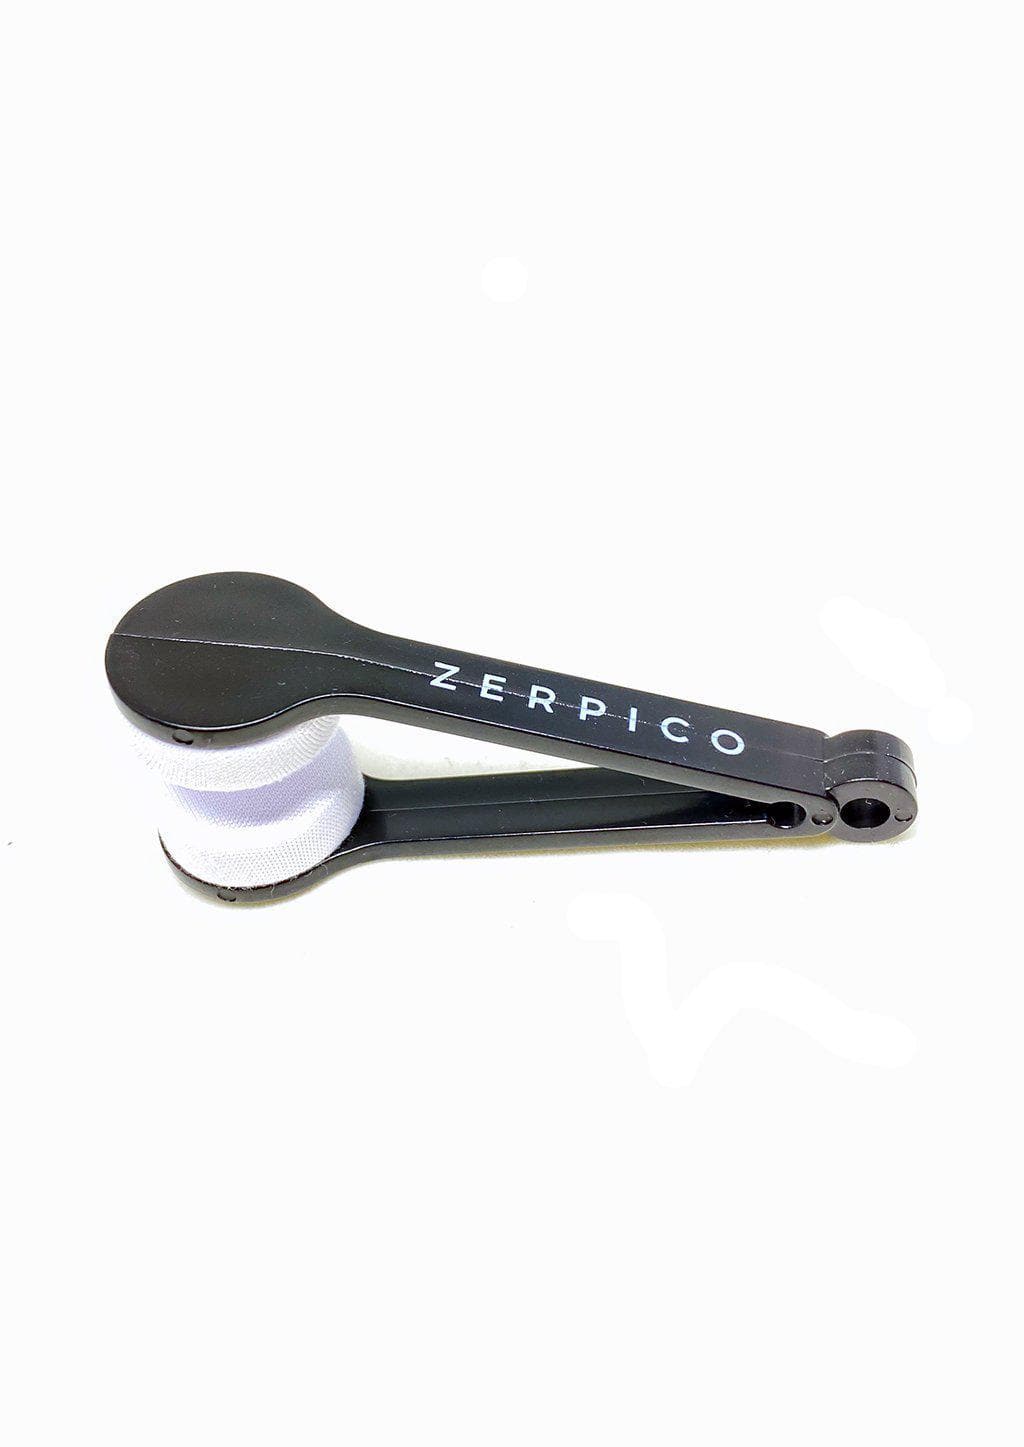 Zerpico Portable Glasses and Sunglasses Cleaner